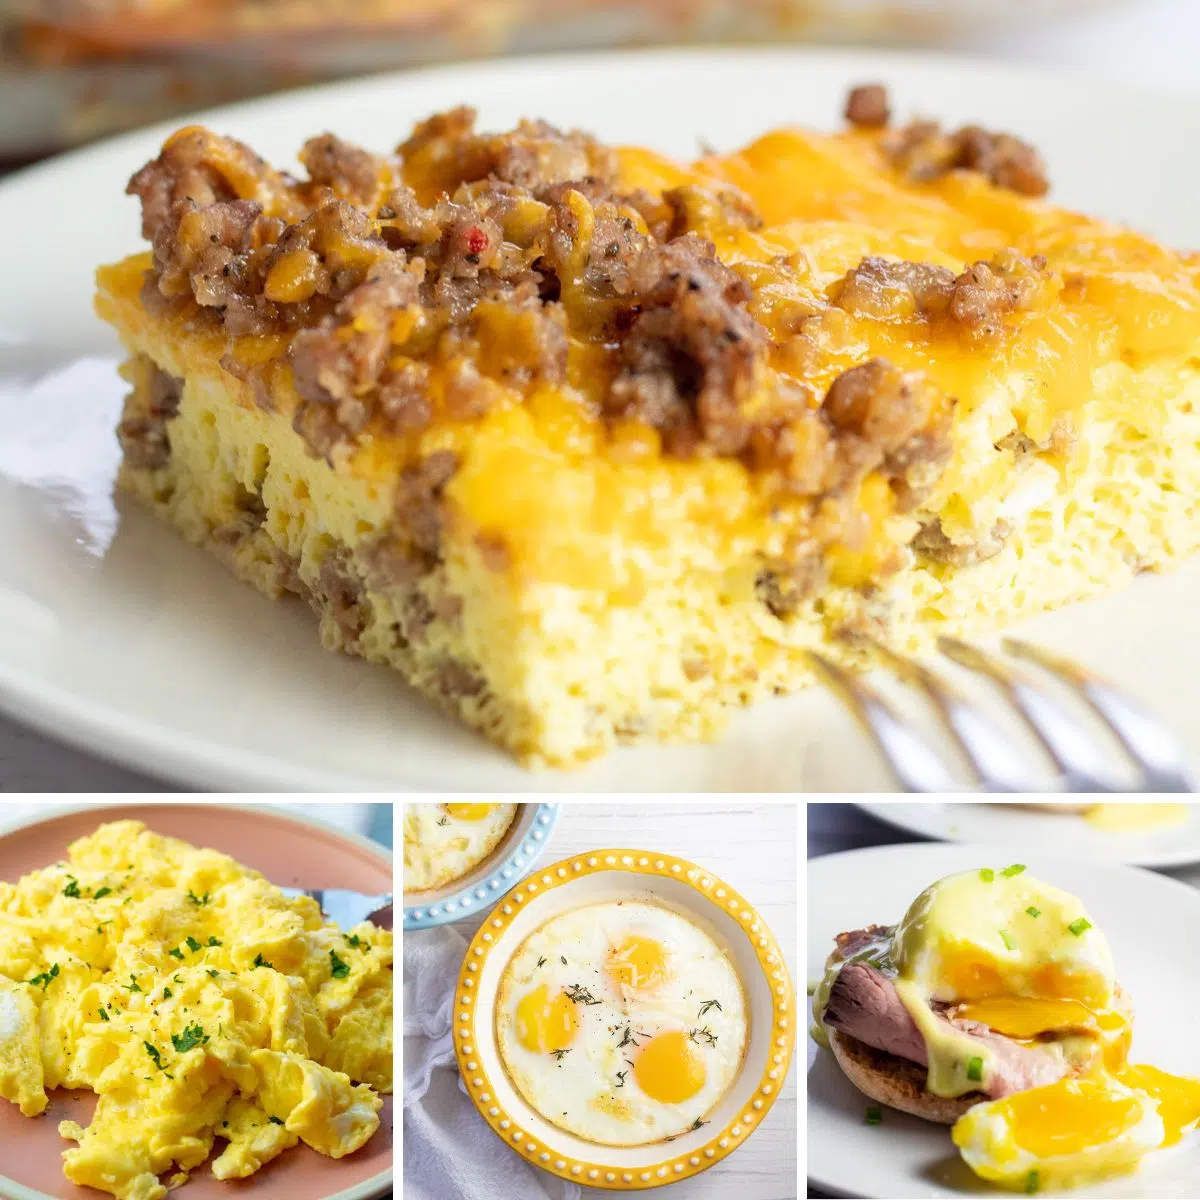 Best egg breakfast recipes collage with 4 featured dishes.